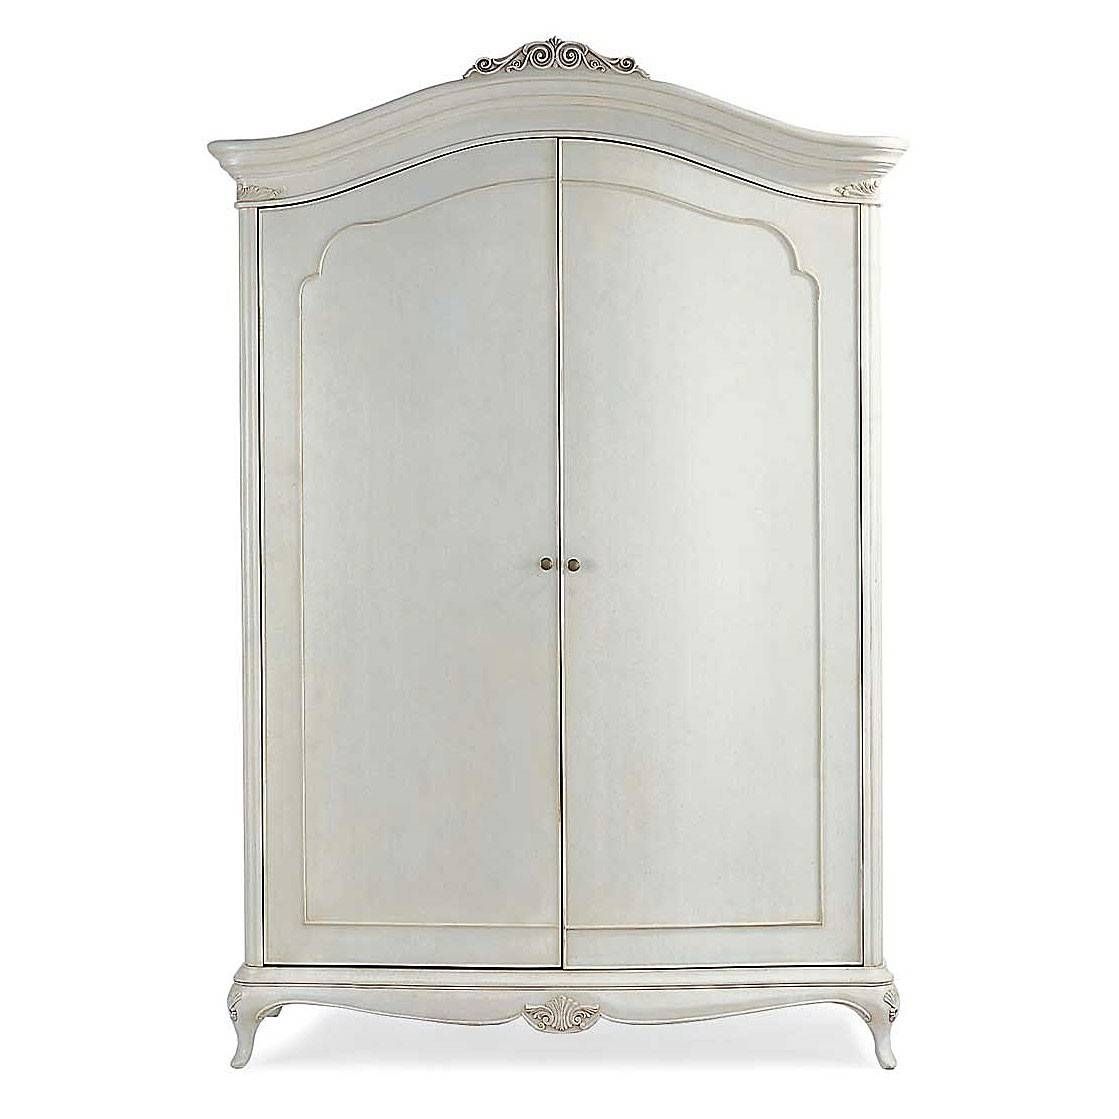 Ivory French Inspired Wide Fitted Wardrobe | French Bedroom Inside Ivory Wardrobes (View 5 of 15)